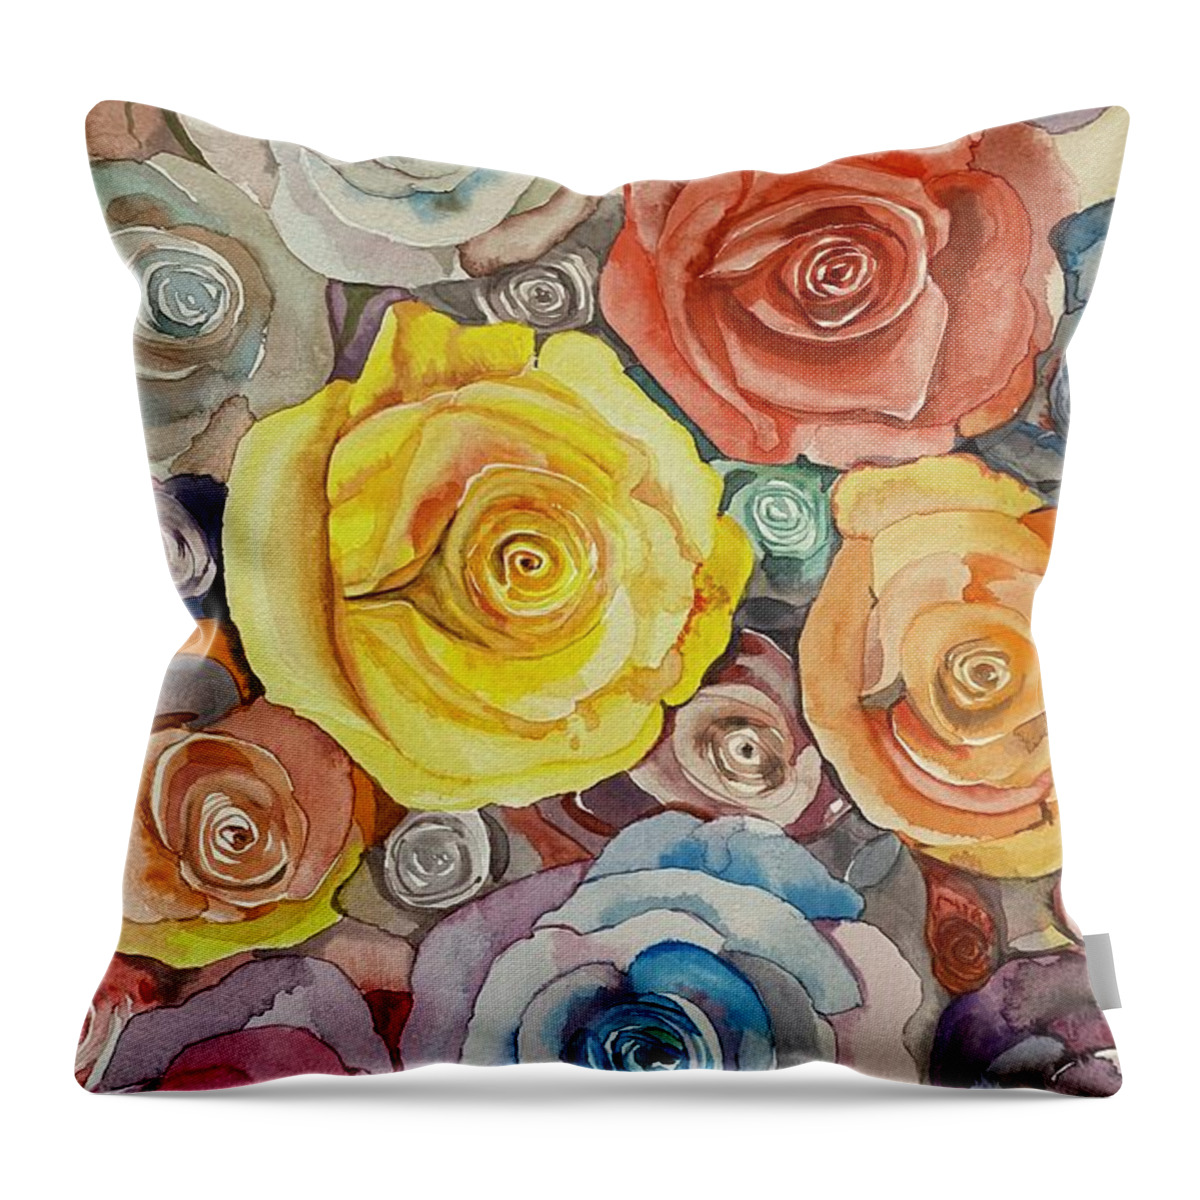 Yellow Throw Pillow featuring the painting Yellow rose by Myungja Anna Koh